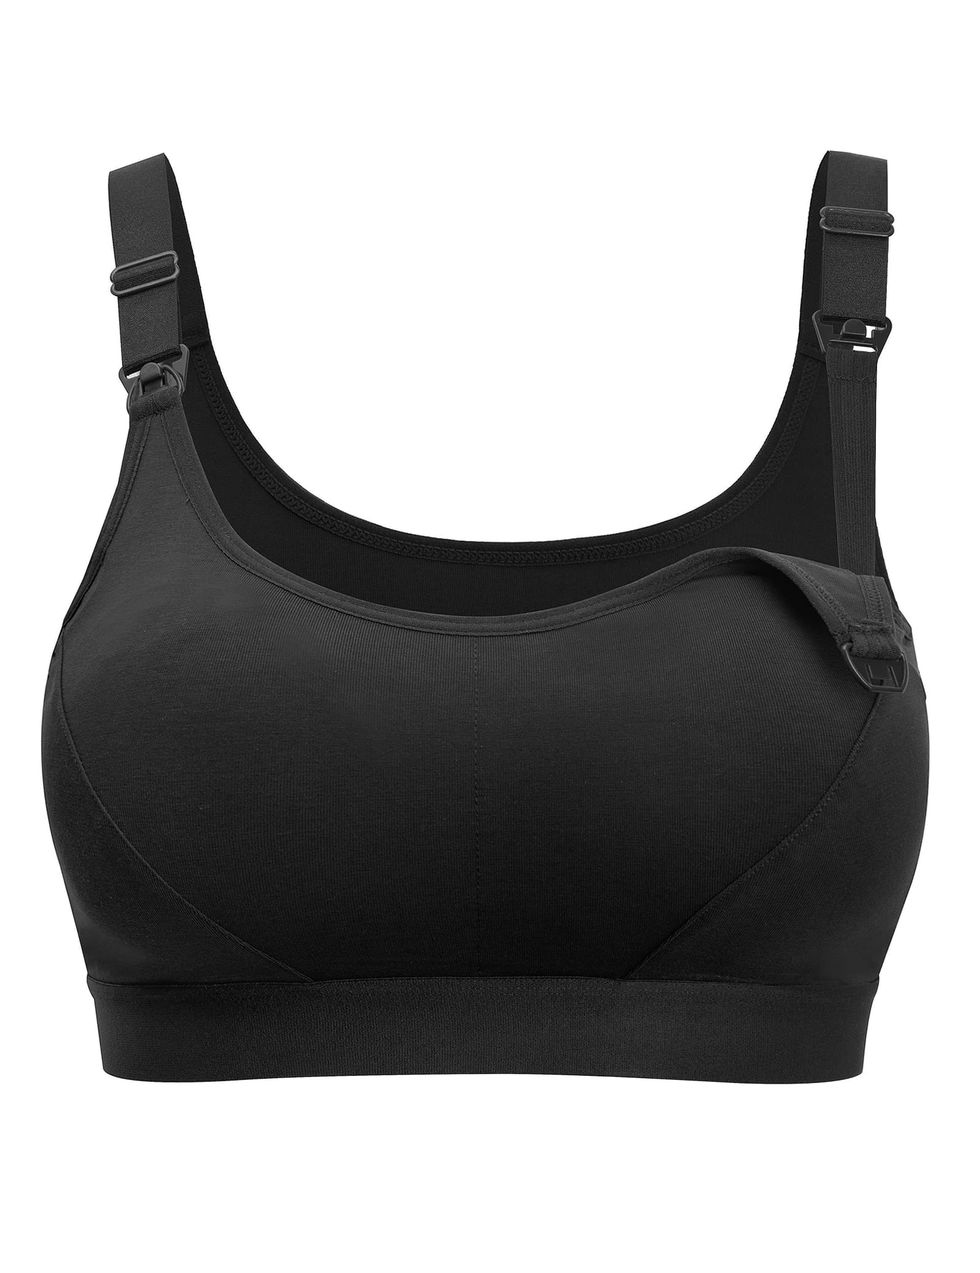 New Moms Swear By These Affordable Sports Bras for Nursing